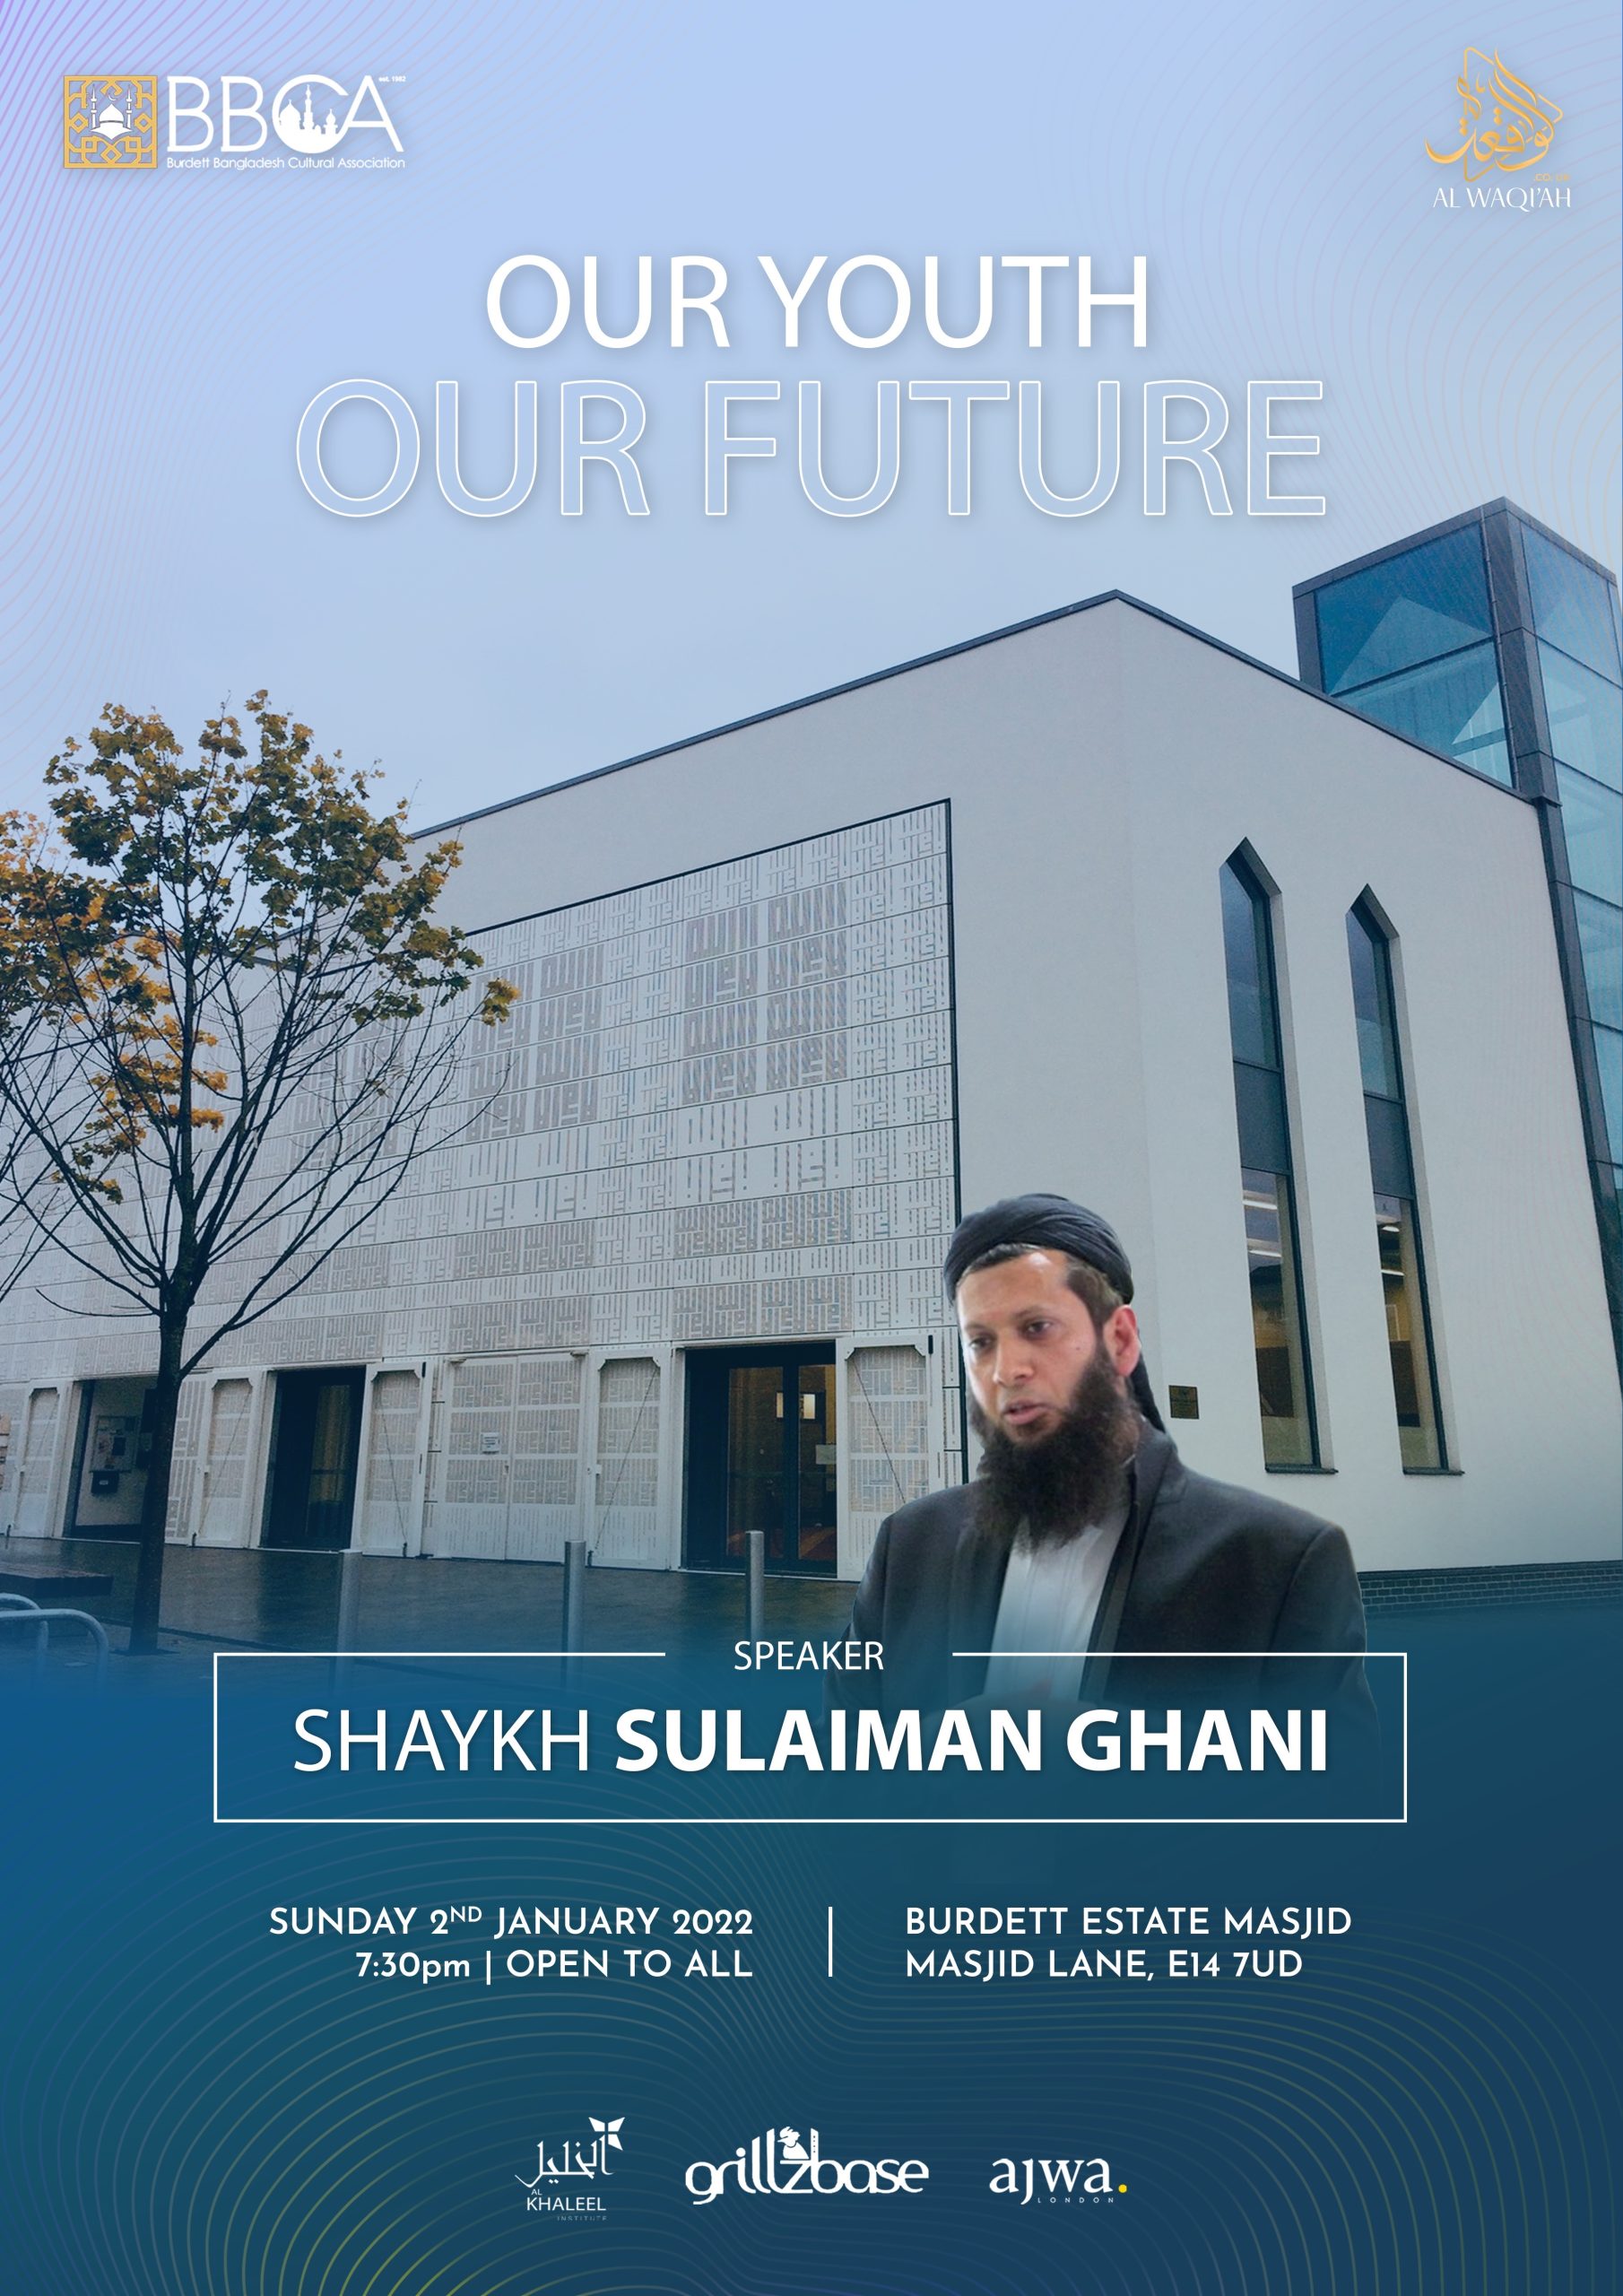 OUR YOUTH OUR FUTURE | Shaykh Sulaiman Ghani